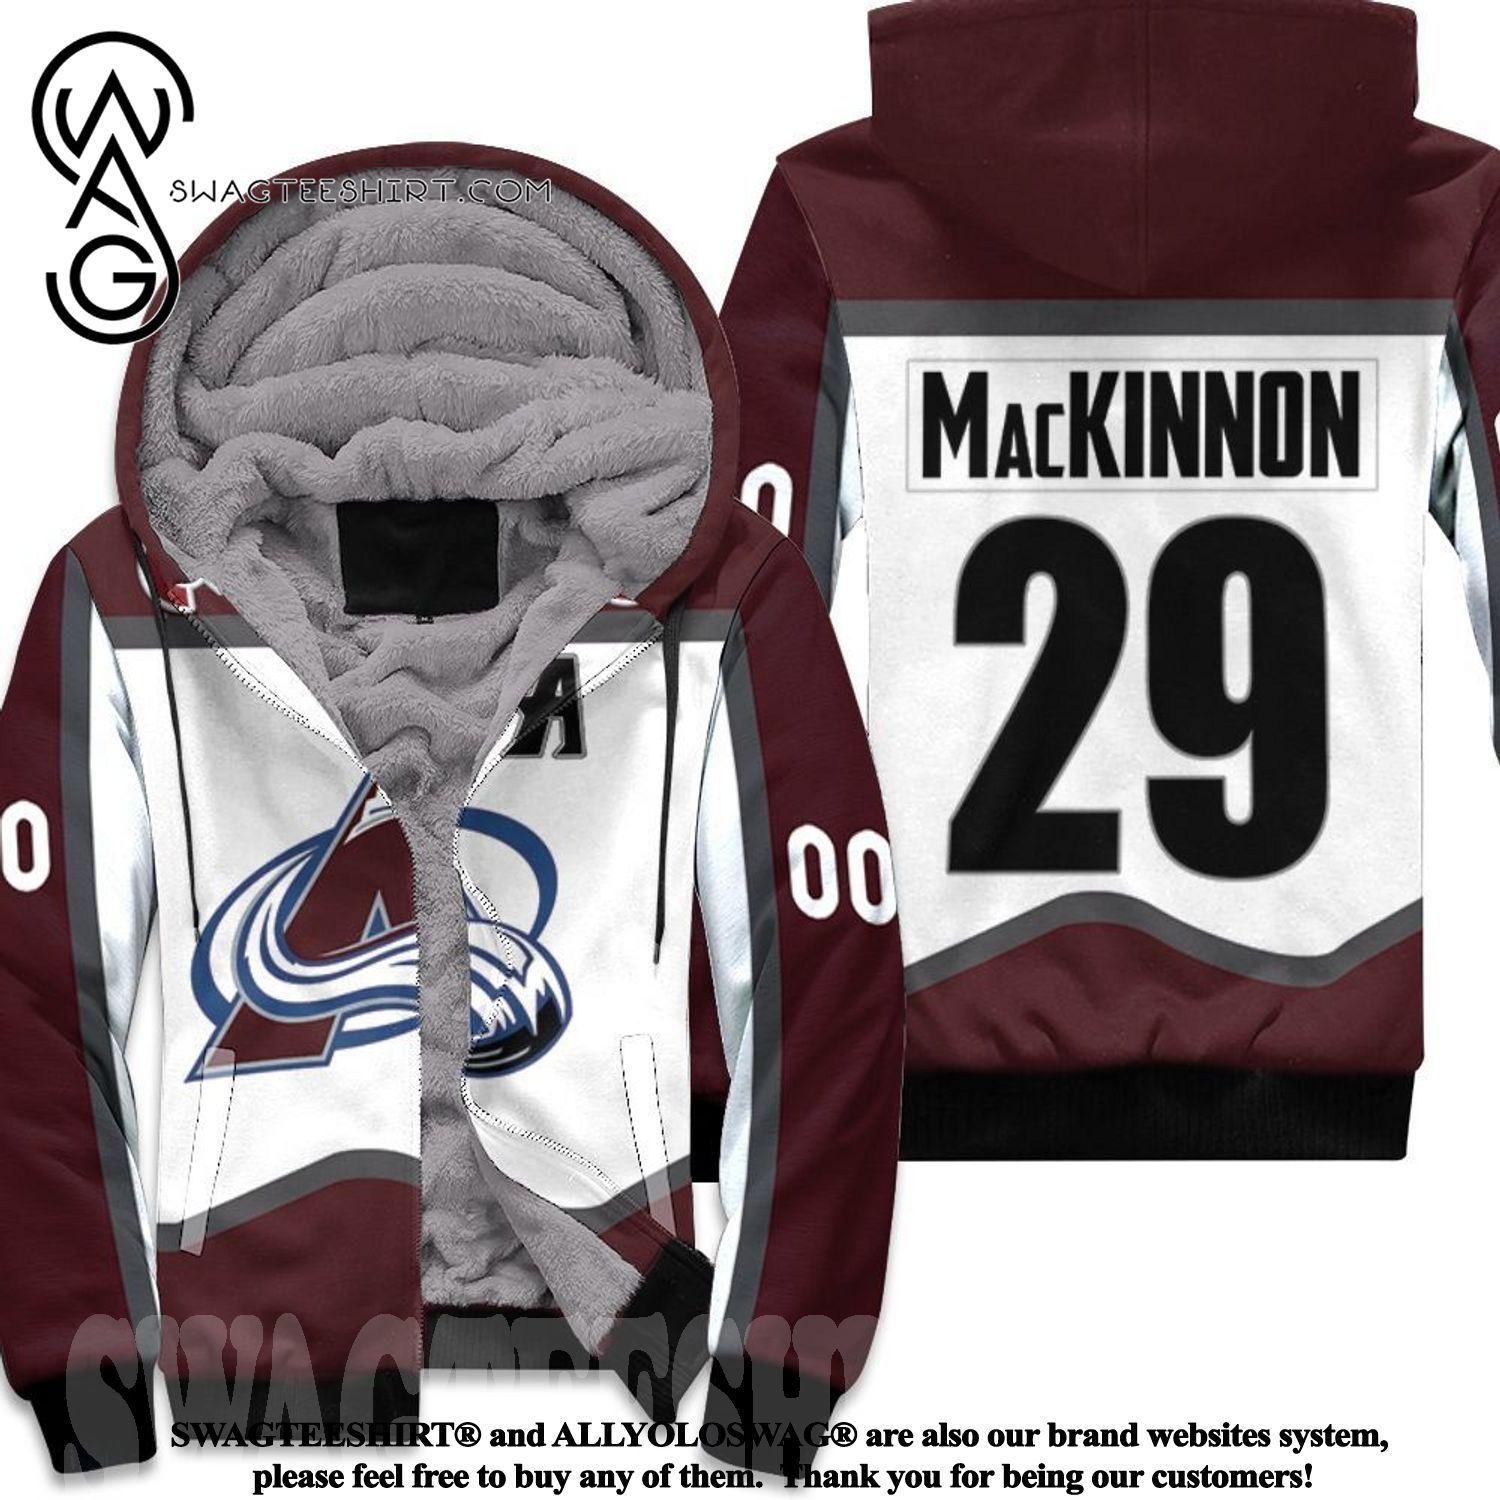 Colorado Avalanche Nathan Mackinnon 29 Nhl 2020 White And Wine Inspired Style Hot Fashion 3D Fleece Hoodie